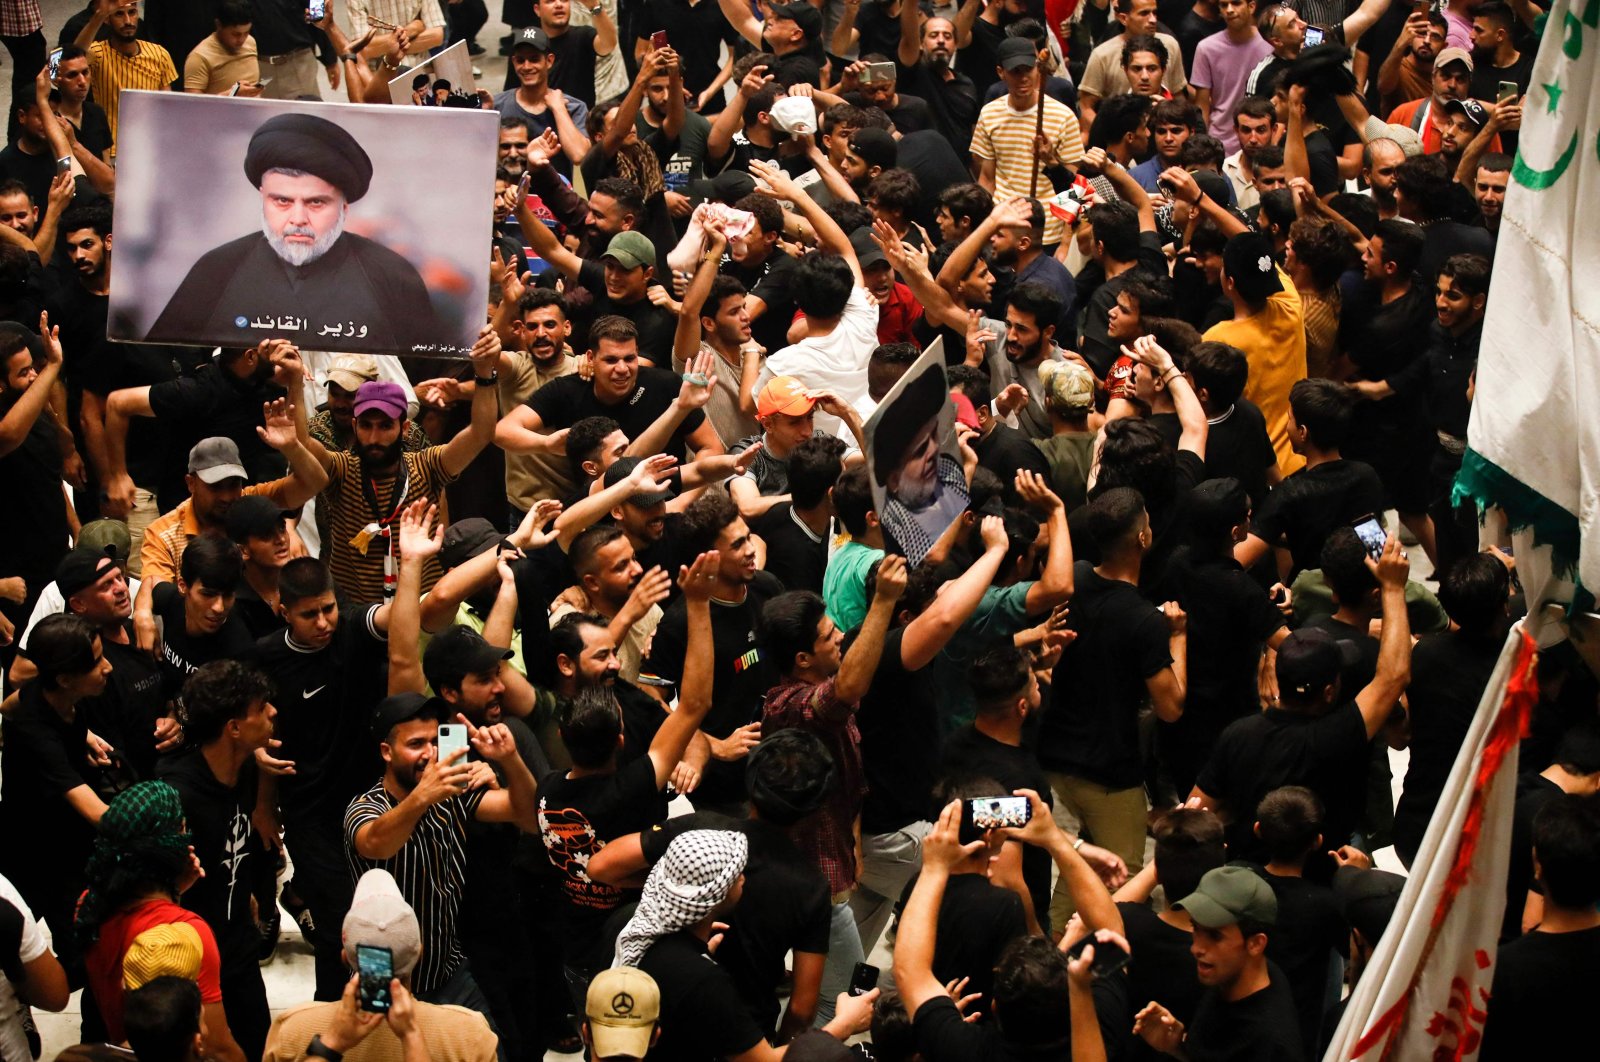 Supporters of Iraqi cleric Muqtada Sadr (image) wave flags as they occupy the Iraqi parliament for a fifth consecutive day, in protest at a nomination for prime minister by a rival Shiite faction, in the capital Baghdad&#039;s high-security Green Zone, Iraq, Aug. 3, 2022. (AFP Photo)